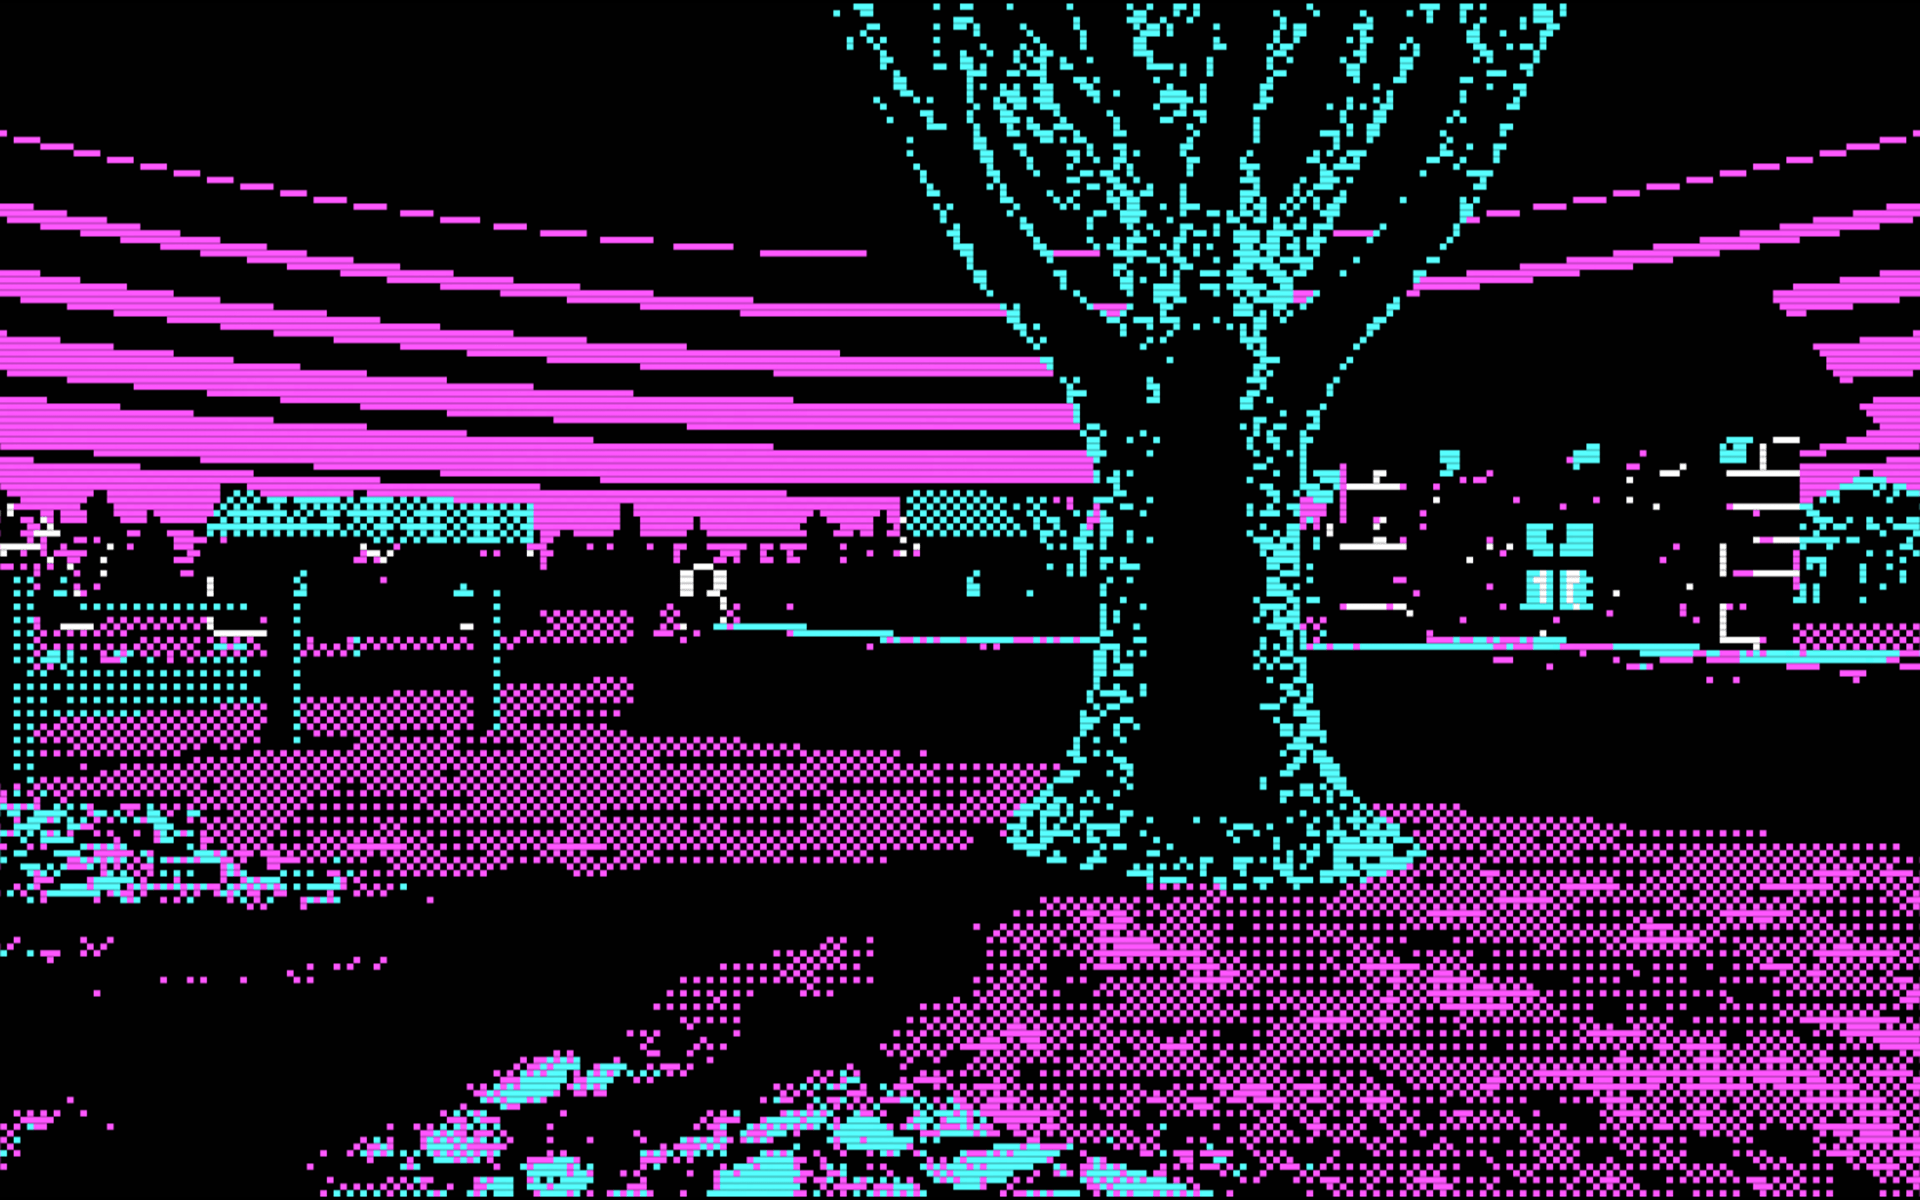 Pixelated purple and black image of a city at night - Arcade